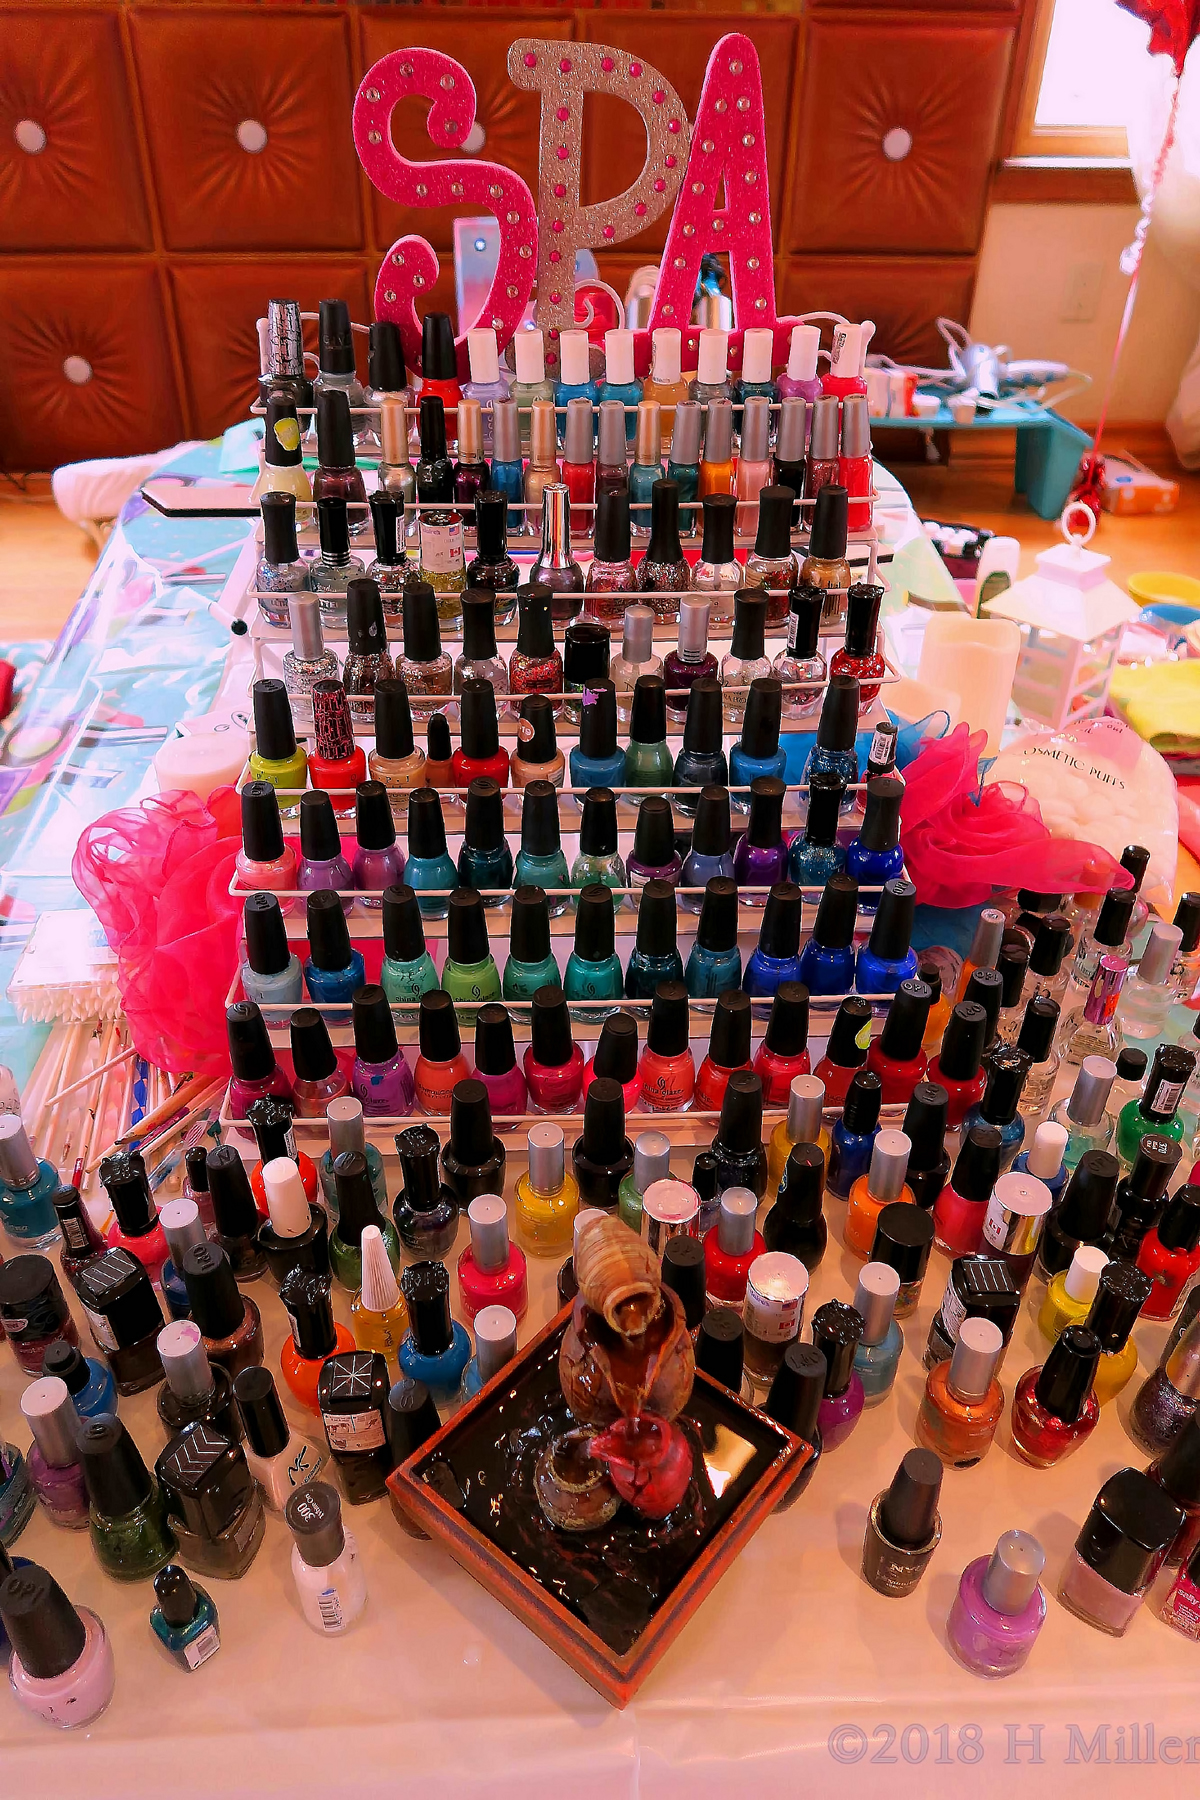 A Huge Collection Of Nail Polish For The Spa Girls To Choose From! 